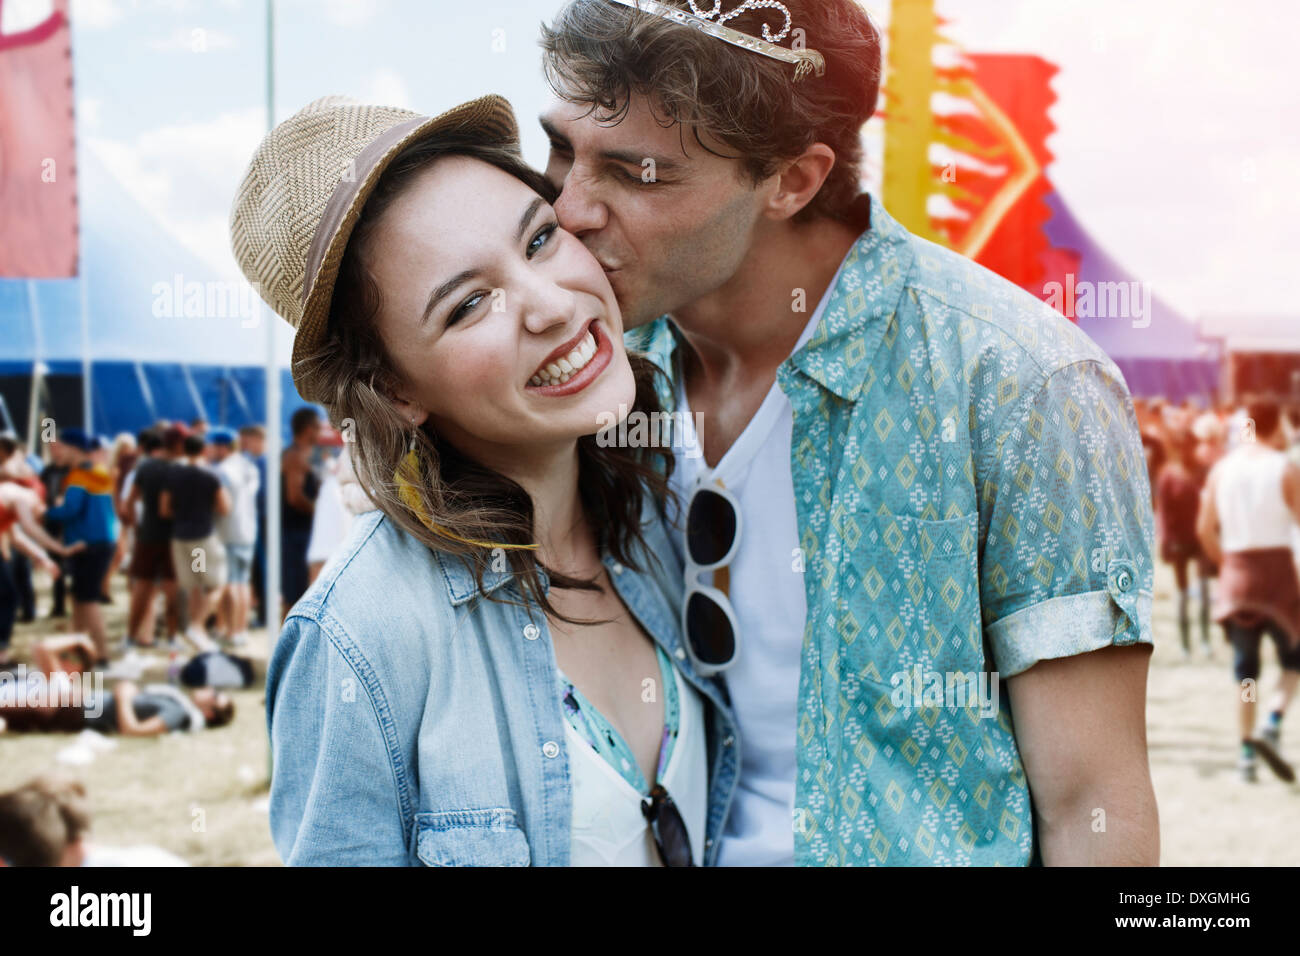 Couple kissing at music festival Stock Photo